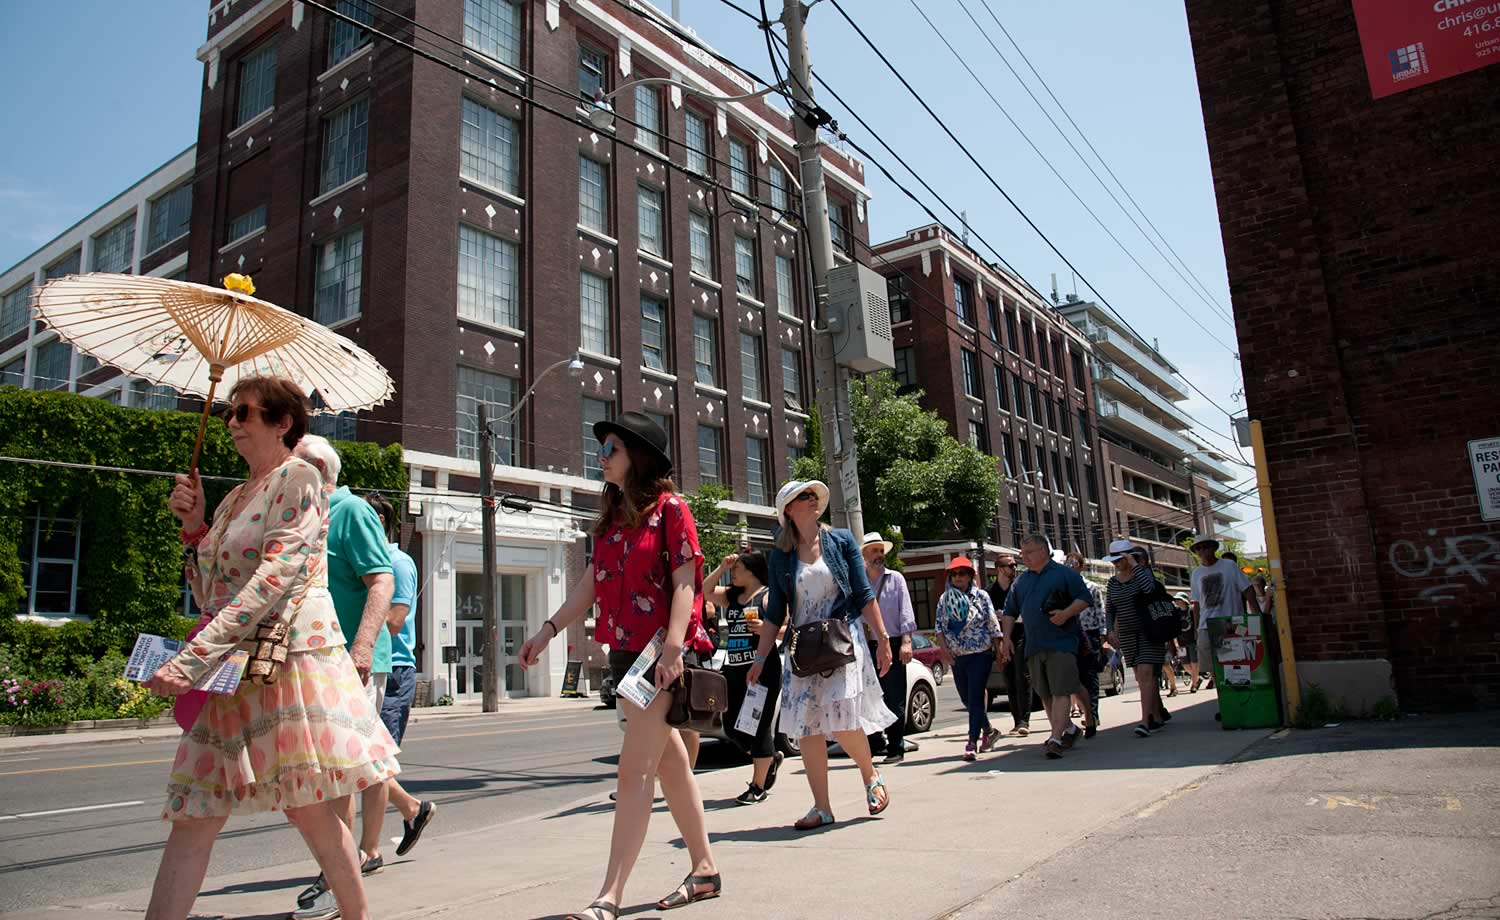 Colour photograph of an industrial brick building divided into to aisles. A tour group walks past the building, on the other side of the street. A women is holding a sun umbrella.